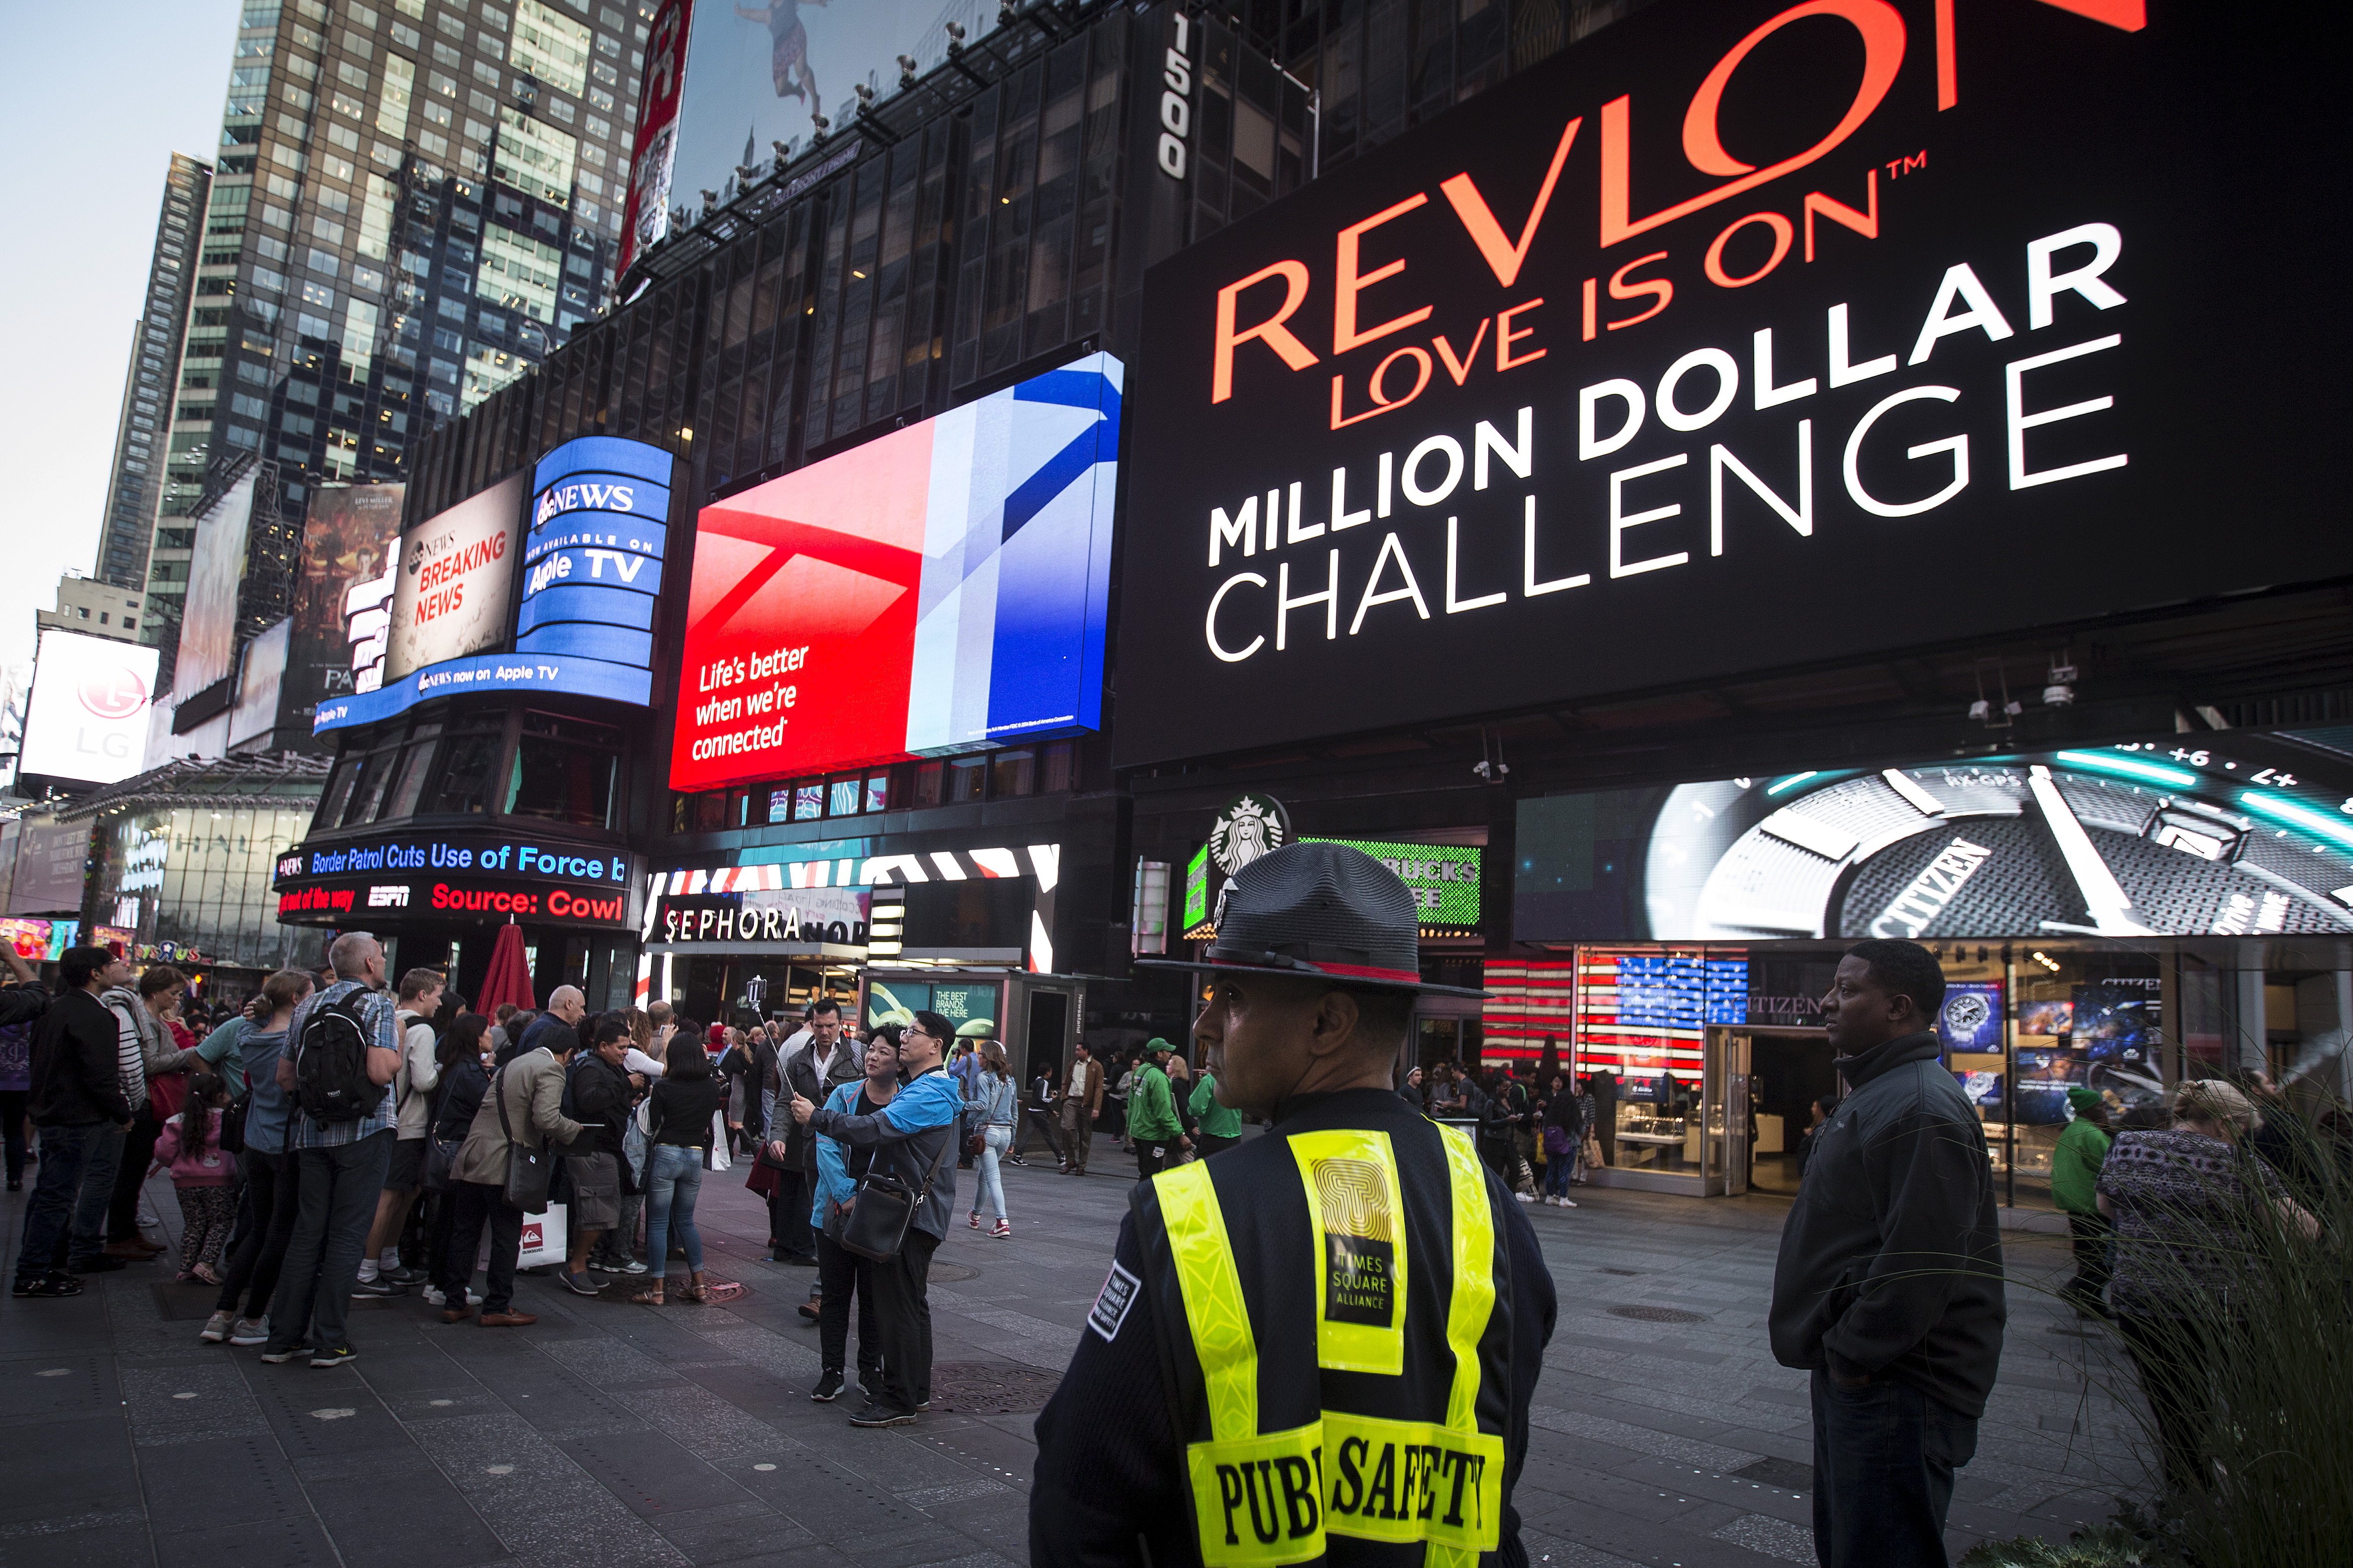 A Public Safety officer keeps watch as people stand in front of  a billboard owned by Revlon that takes their pictures and displays them in Times Square in the Manhattan borough of New York